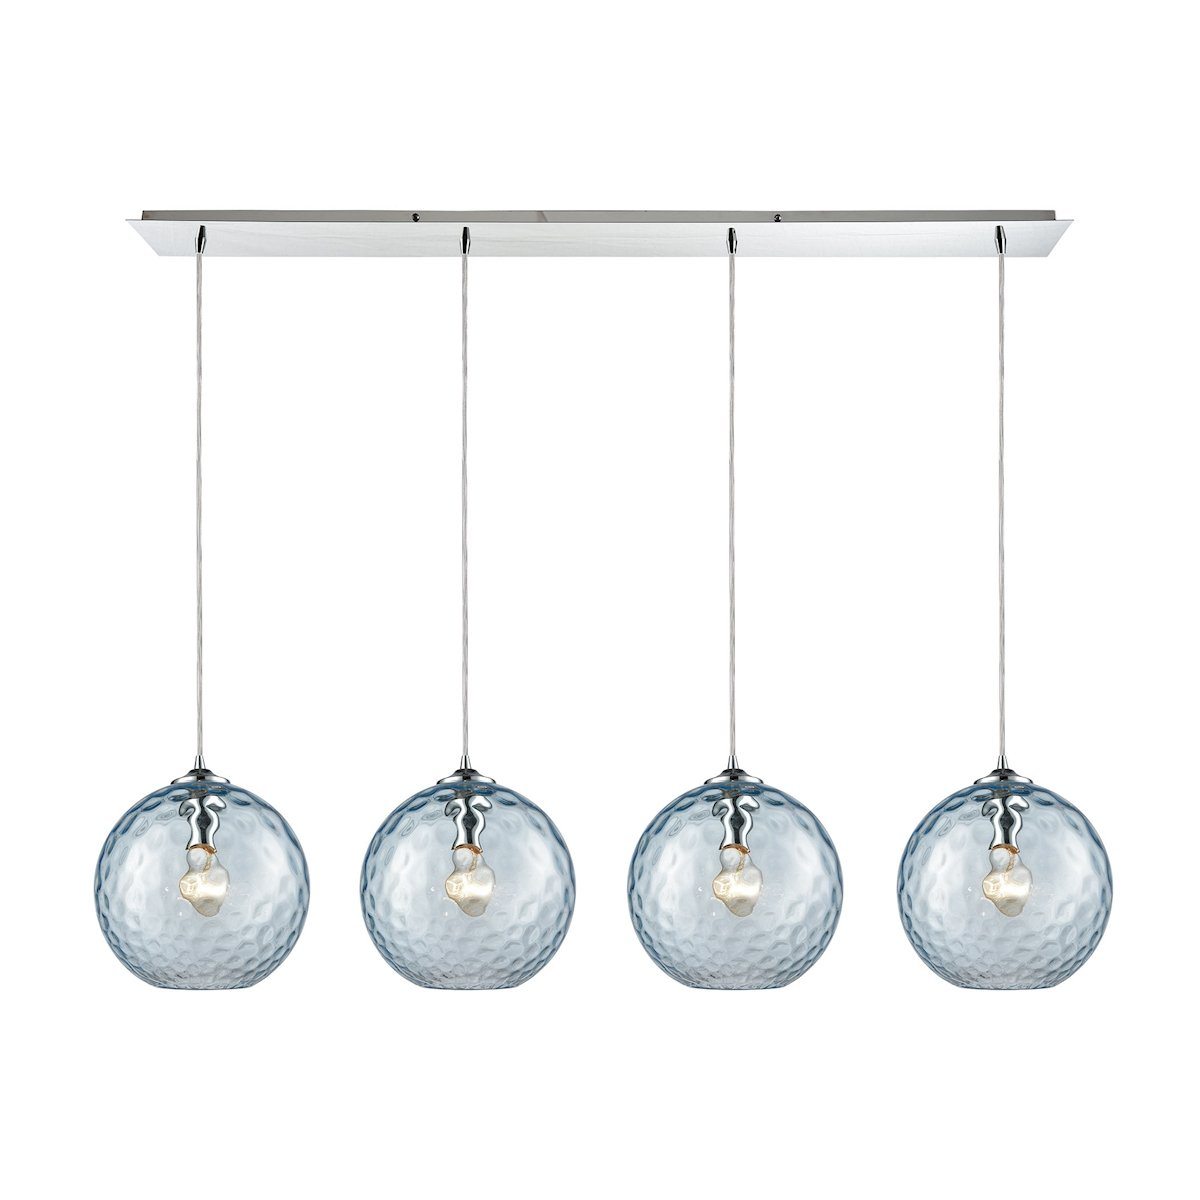 Watersphere 4 Light Linear Pan Fixture In Polished Chrome With Aqua Hammered Glass Ceiling Elk Lighting 